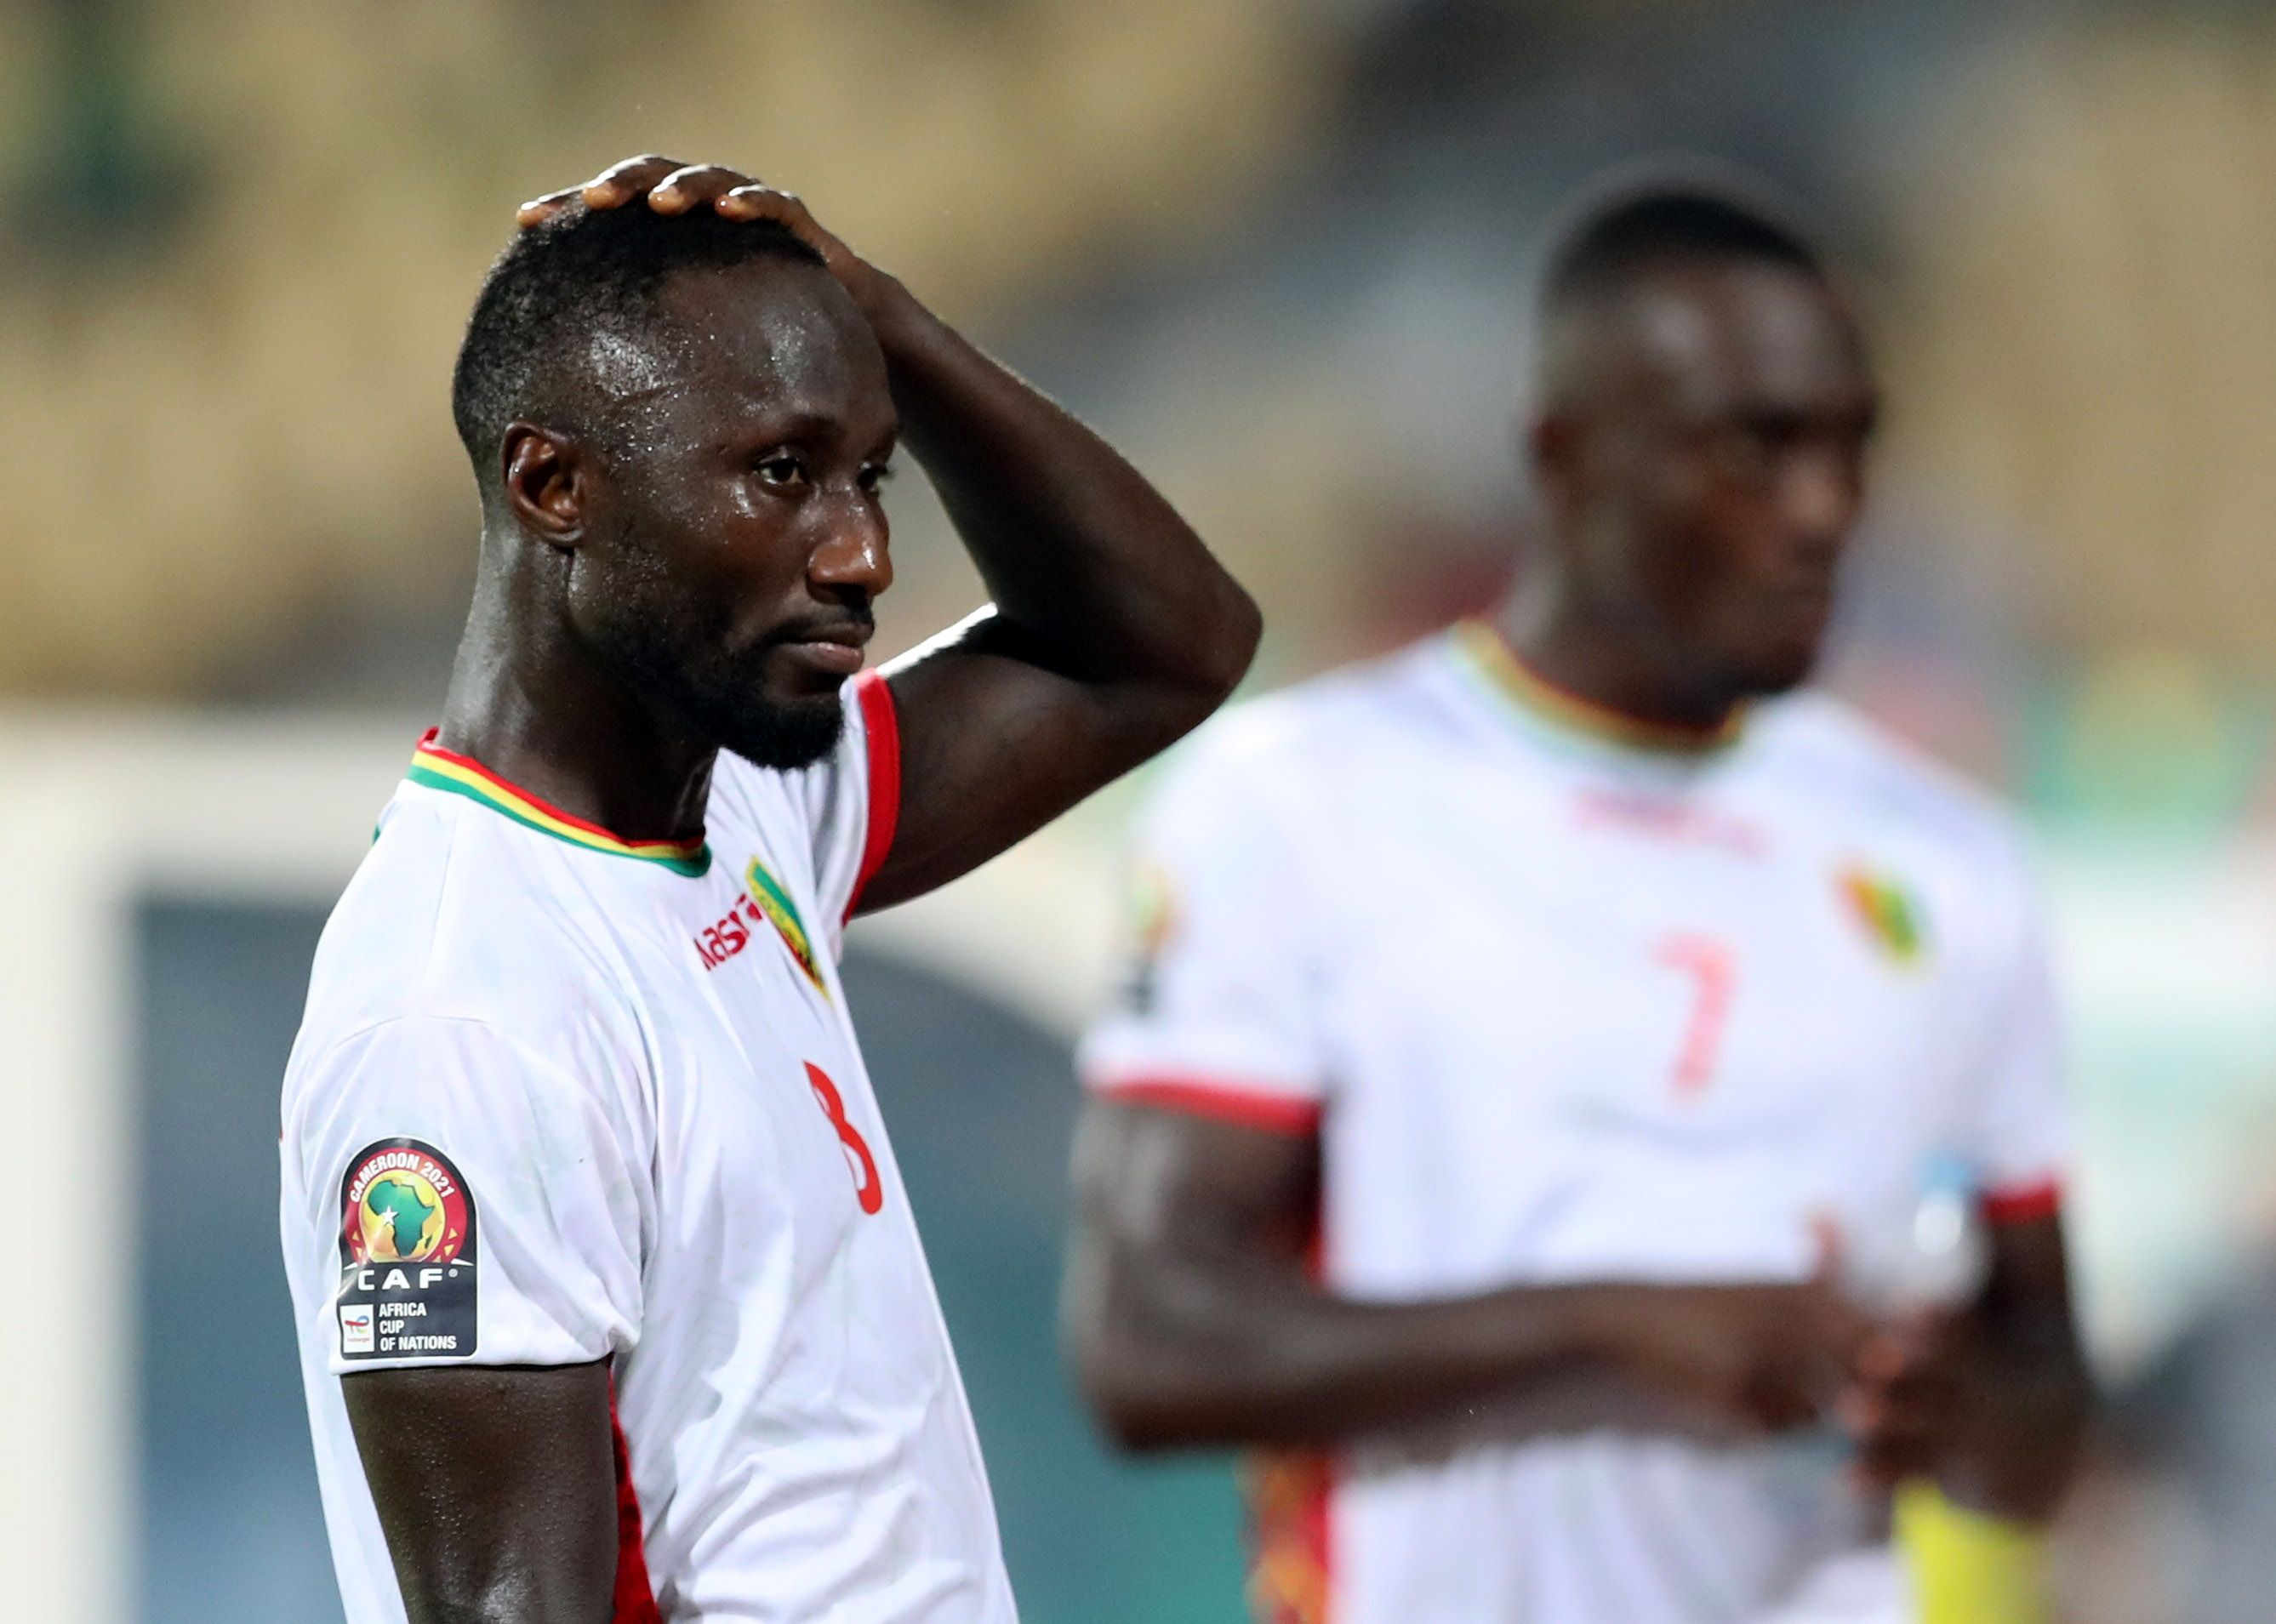 Guinea's Naby Keita looks dejected after the match